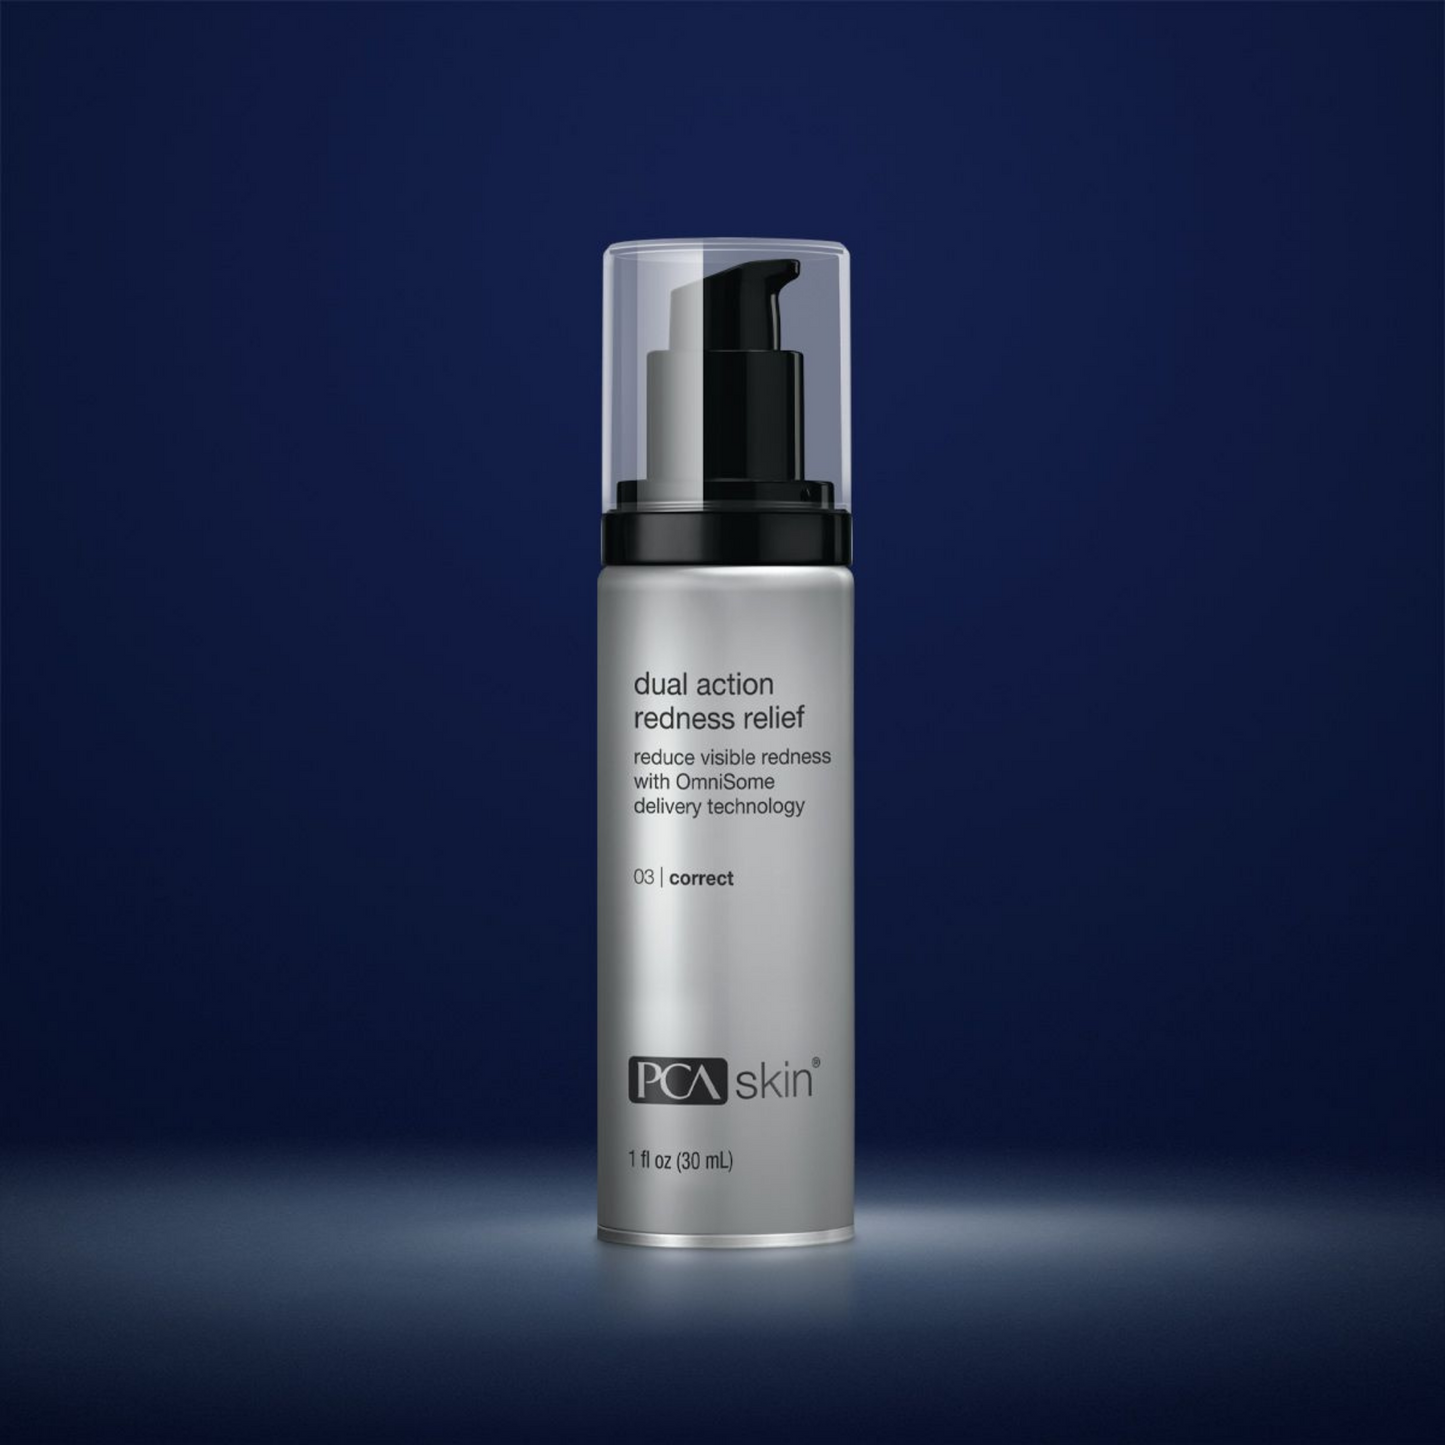 Dual Action Redness Relief | PCA Skin